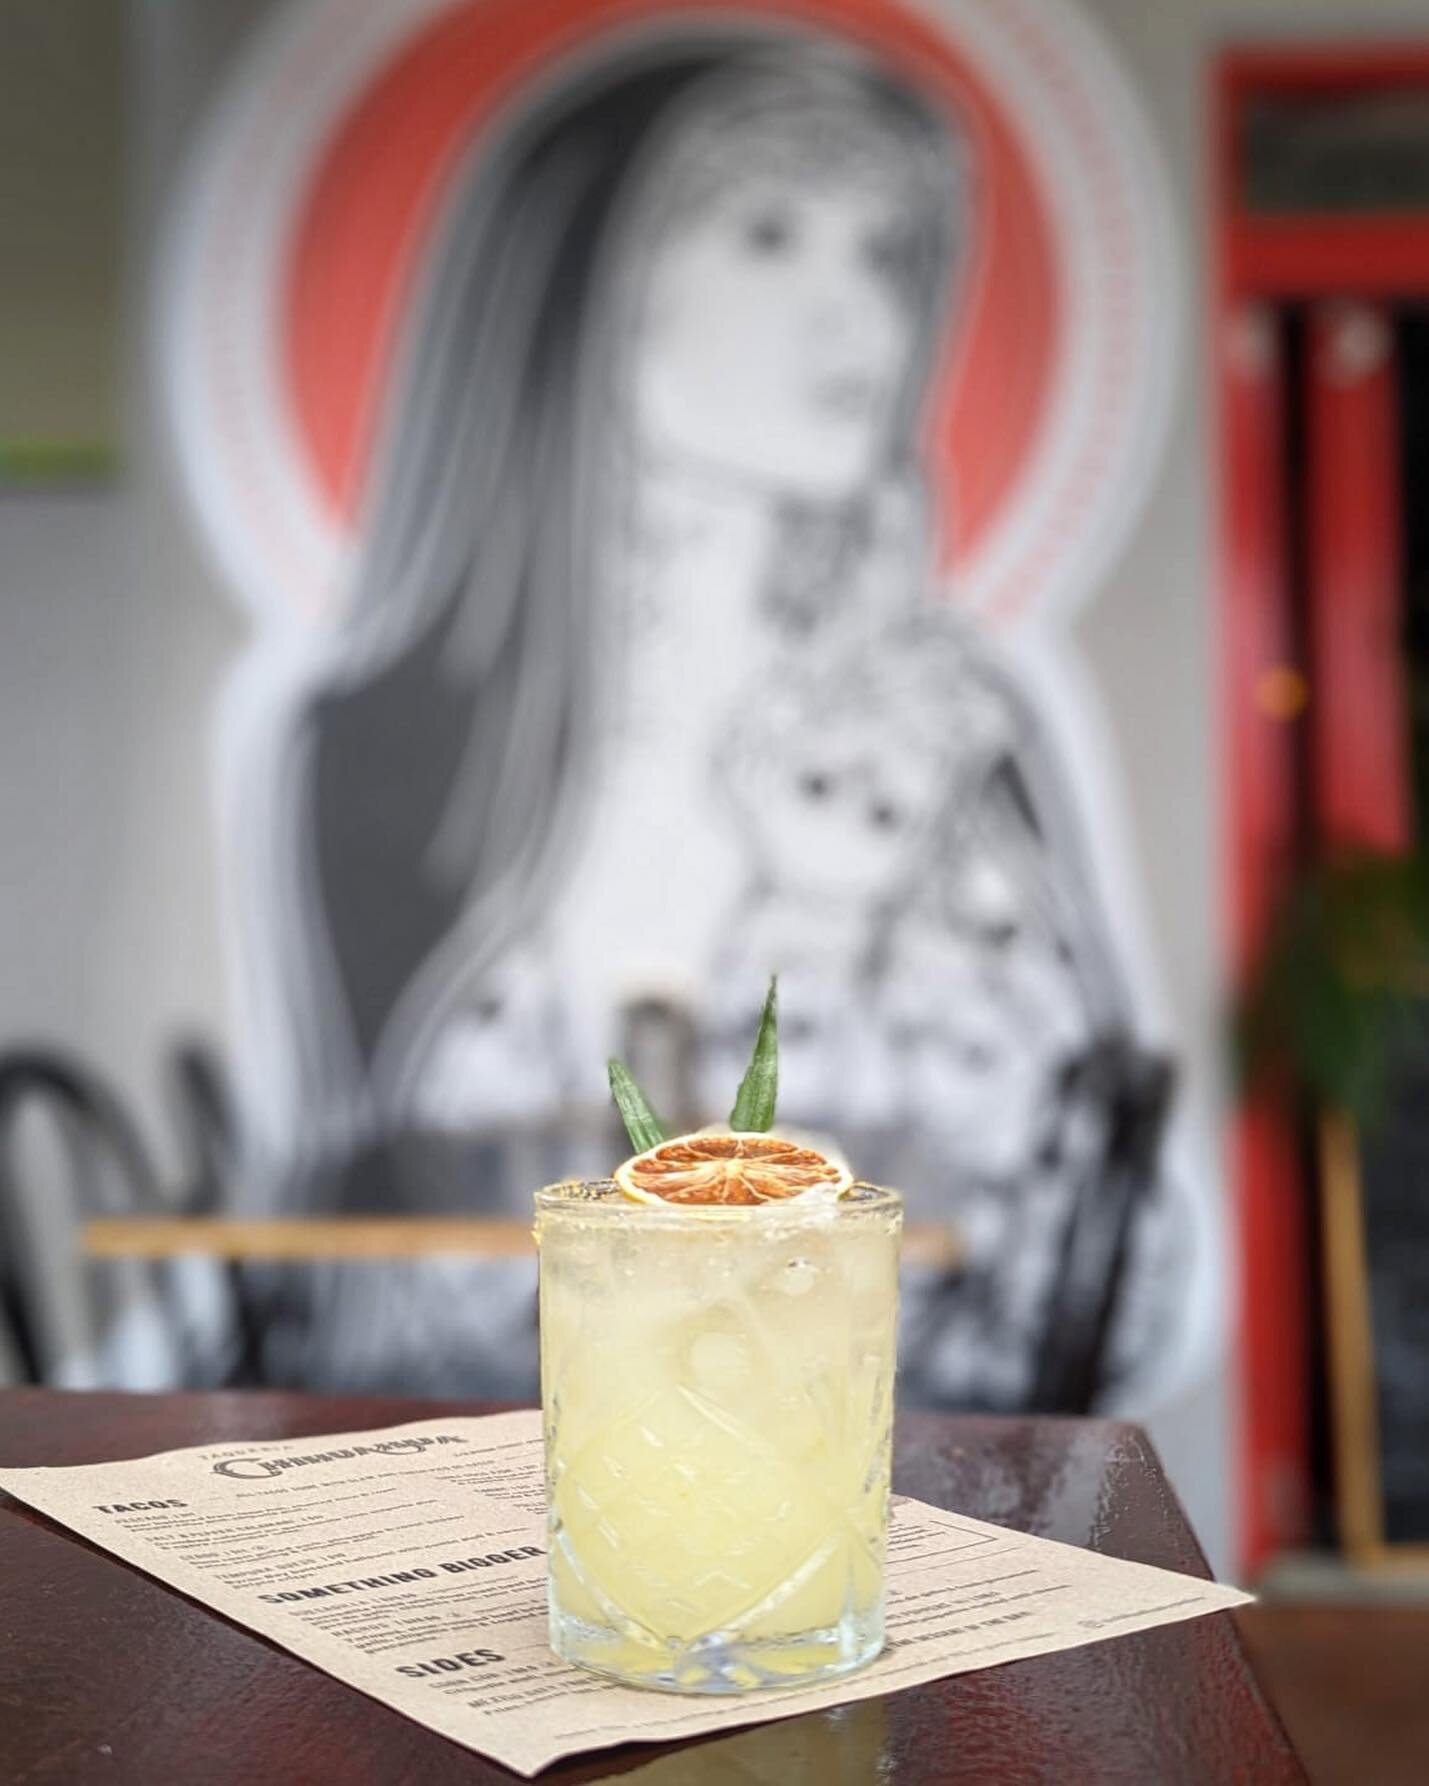 Love a Margi? Try our Pineapple Margarita this week 🍍 

#chihuahuabyron #mexicanbyron #byroncocktails #margitime